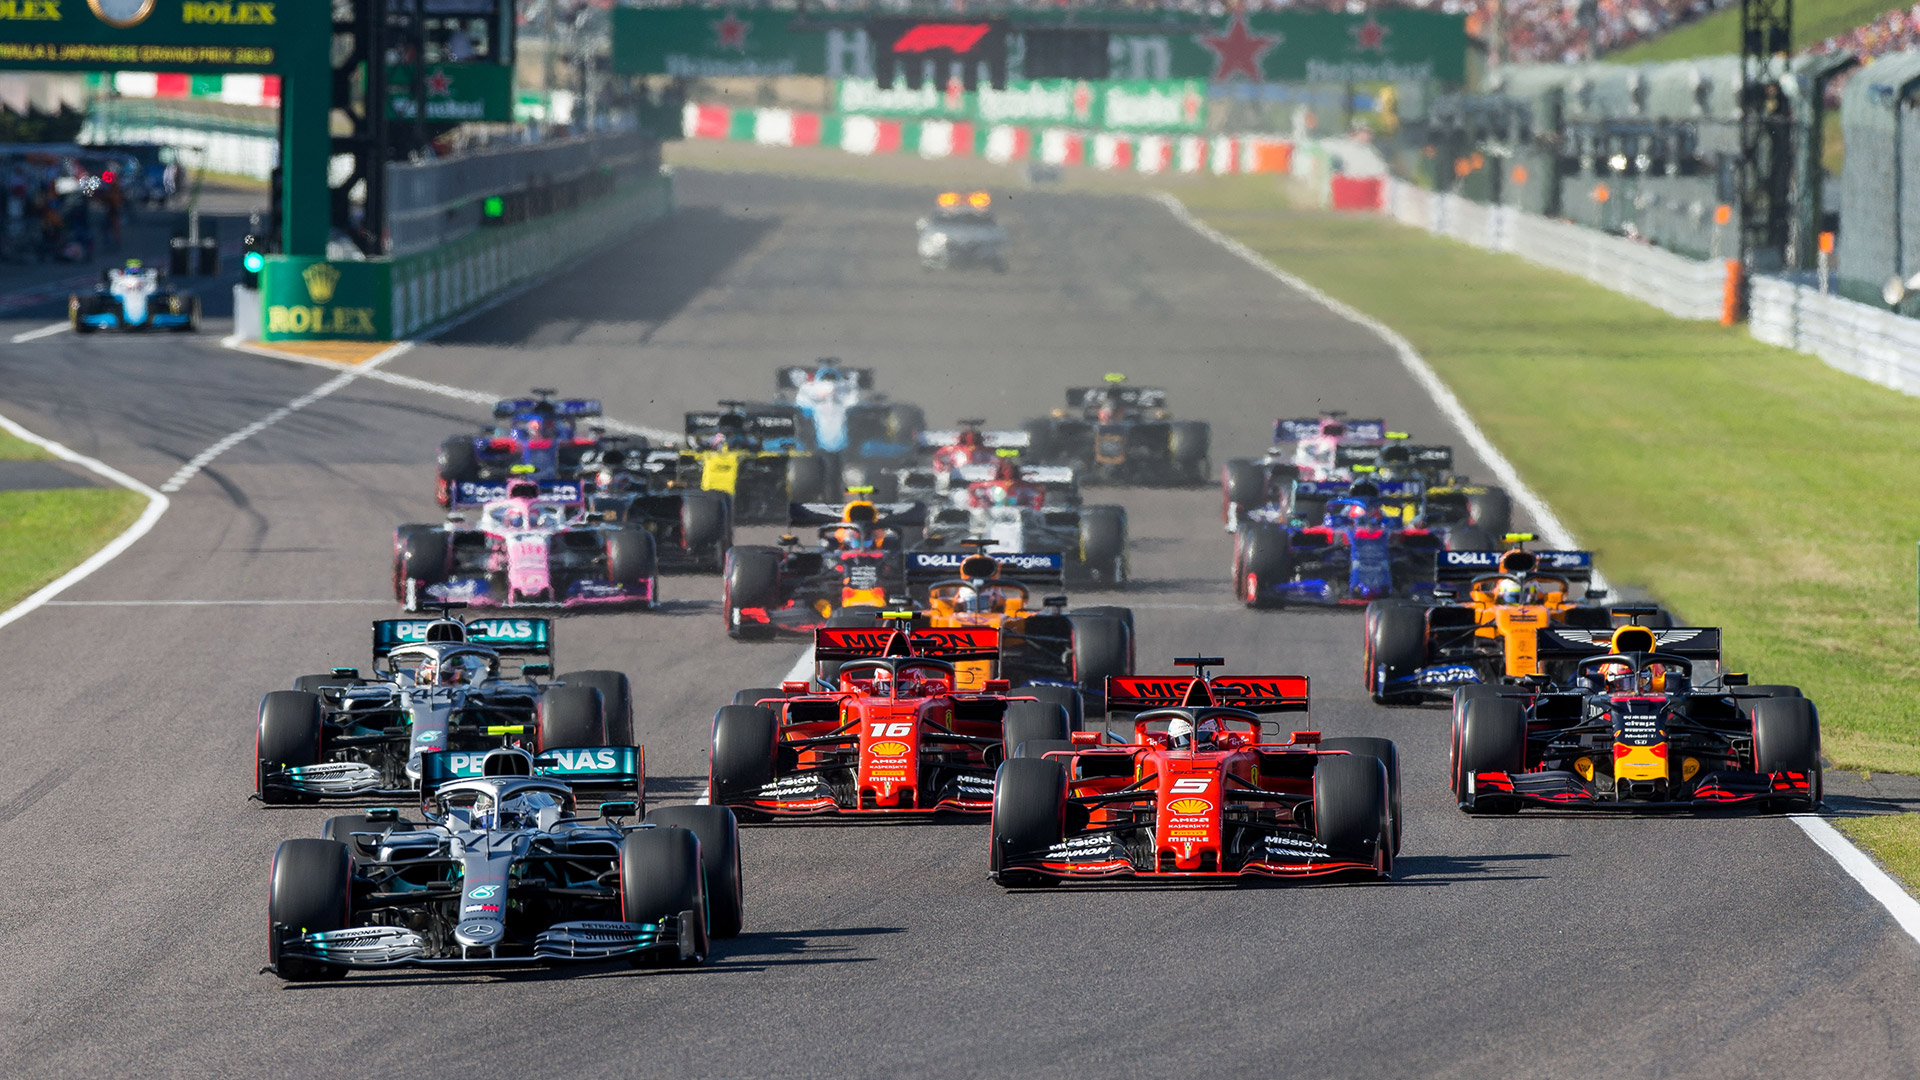 F1 Spanish Grand Prix live stream how to watch for free Digital Trends